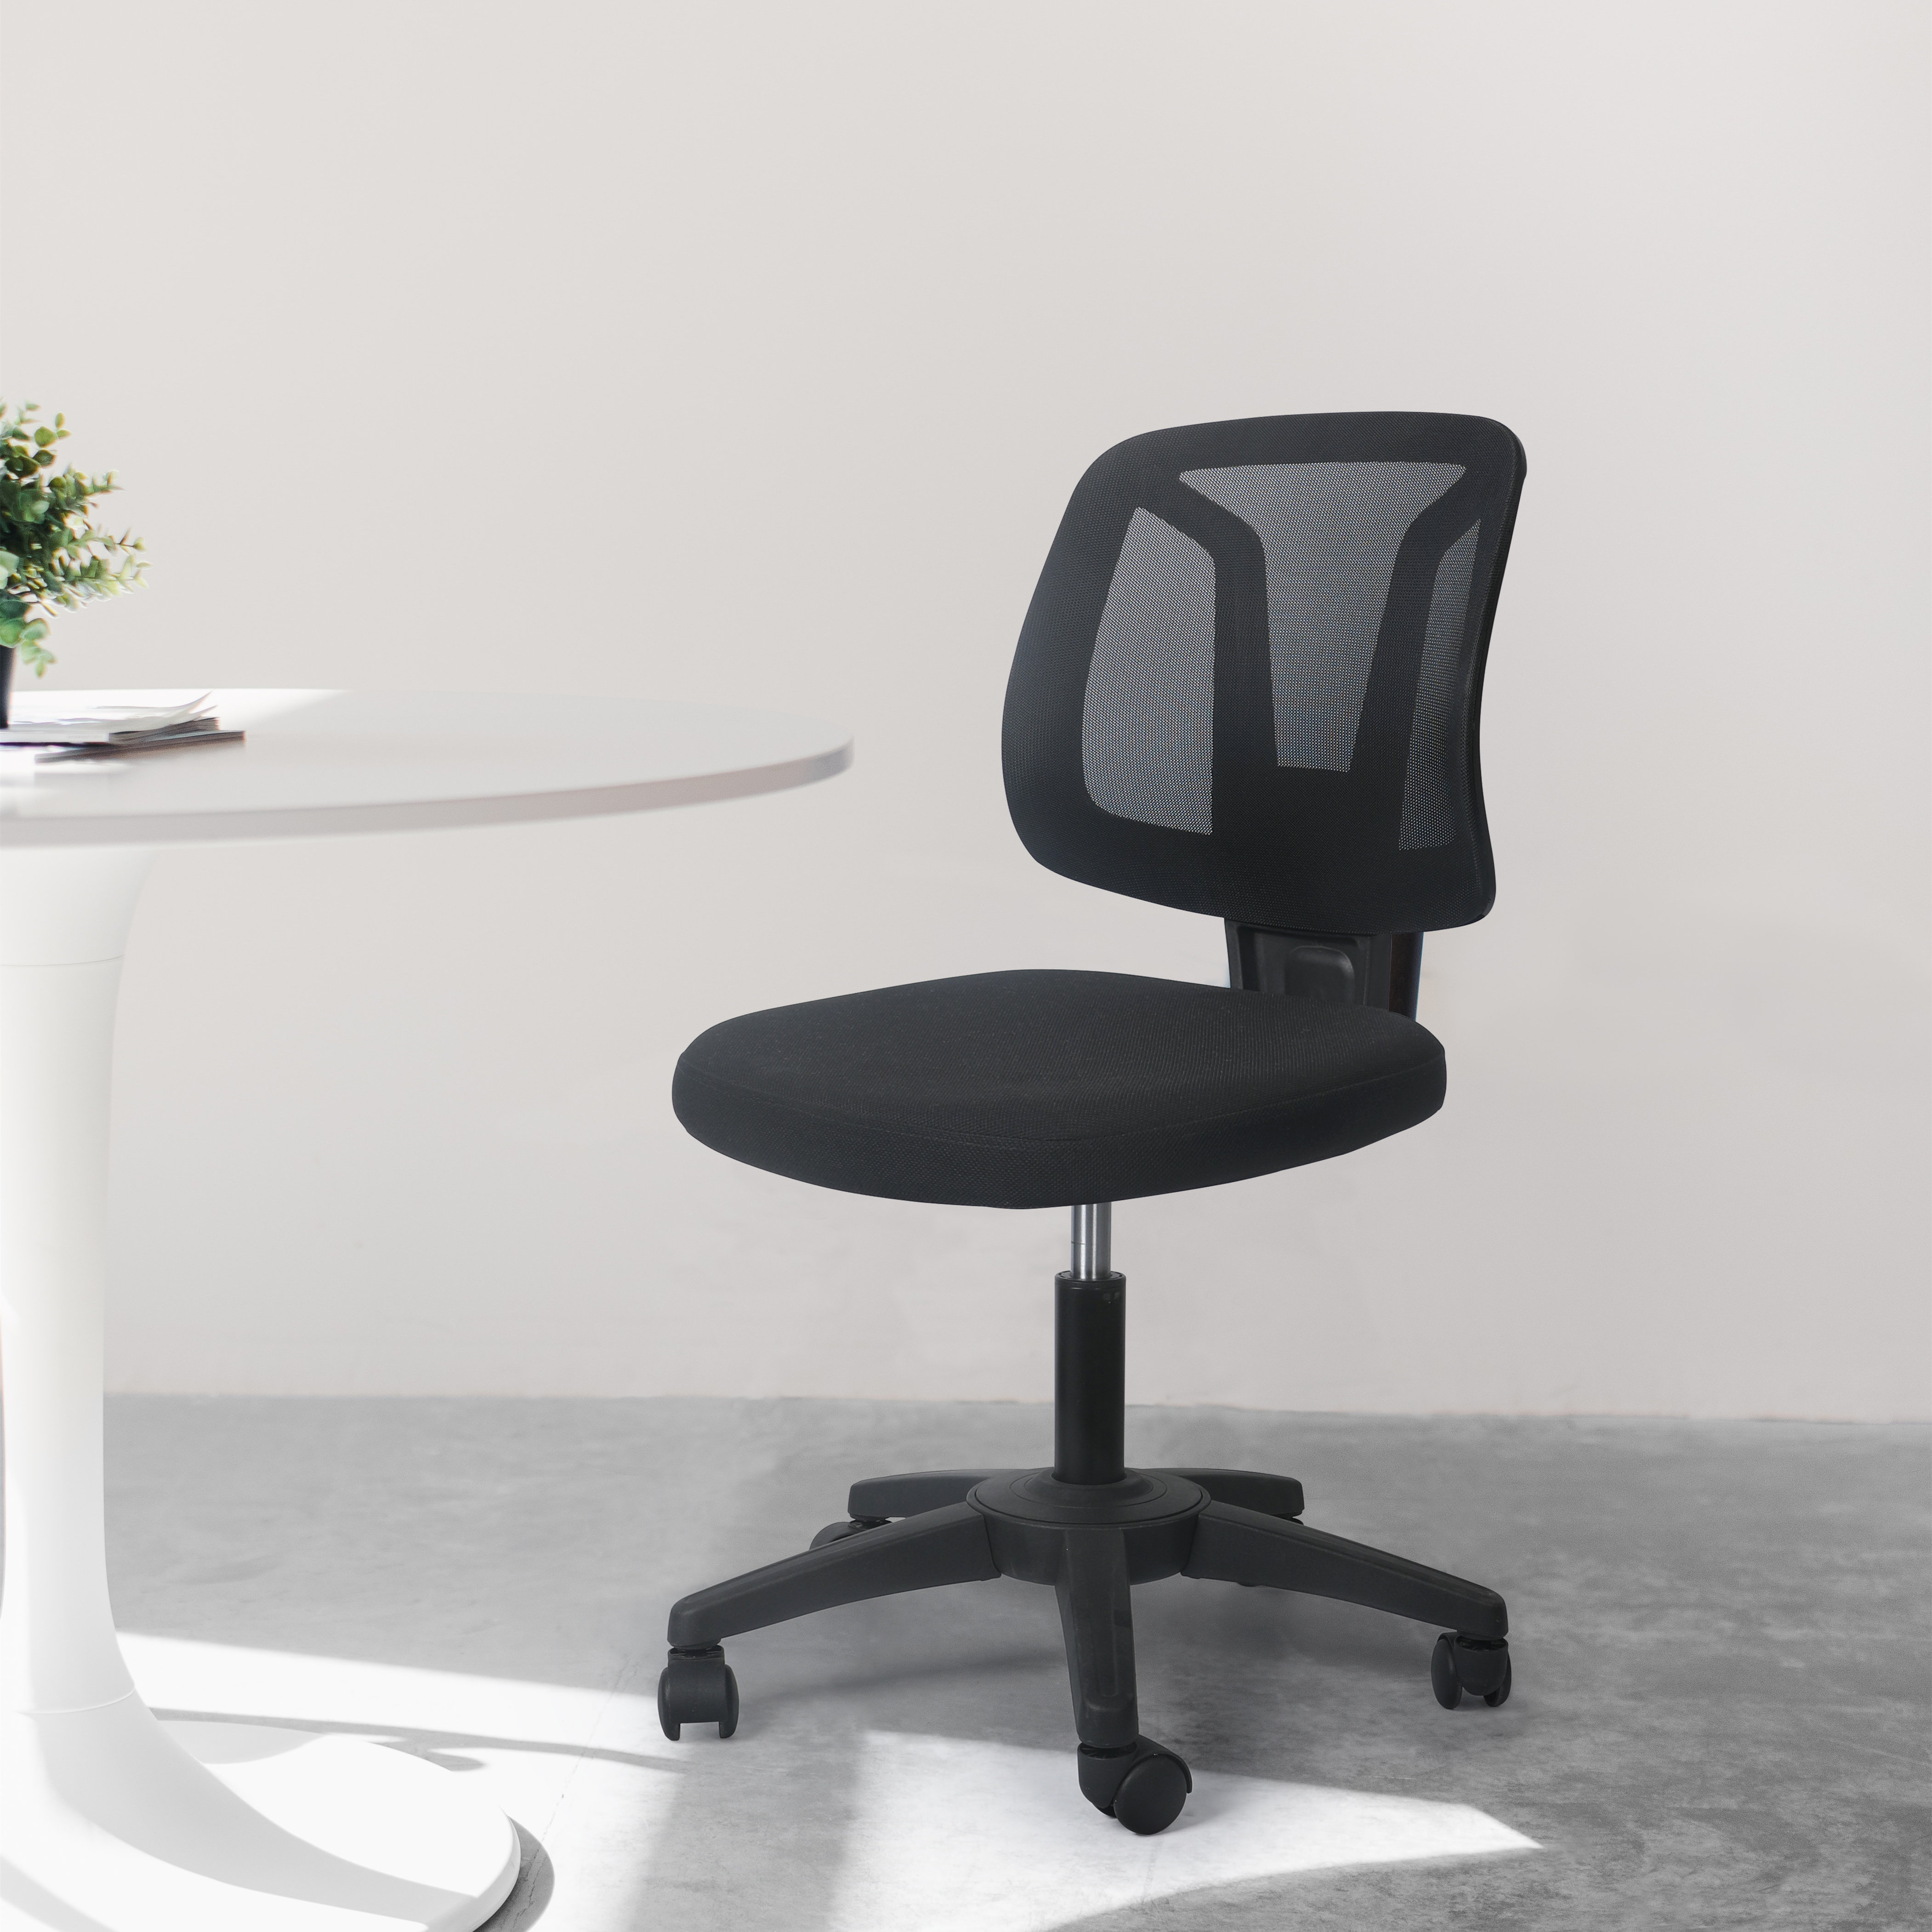 New Black Armless Adjustable Height Office Chair 